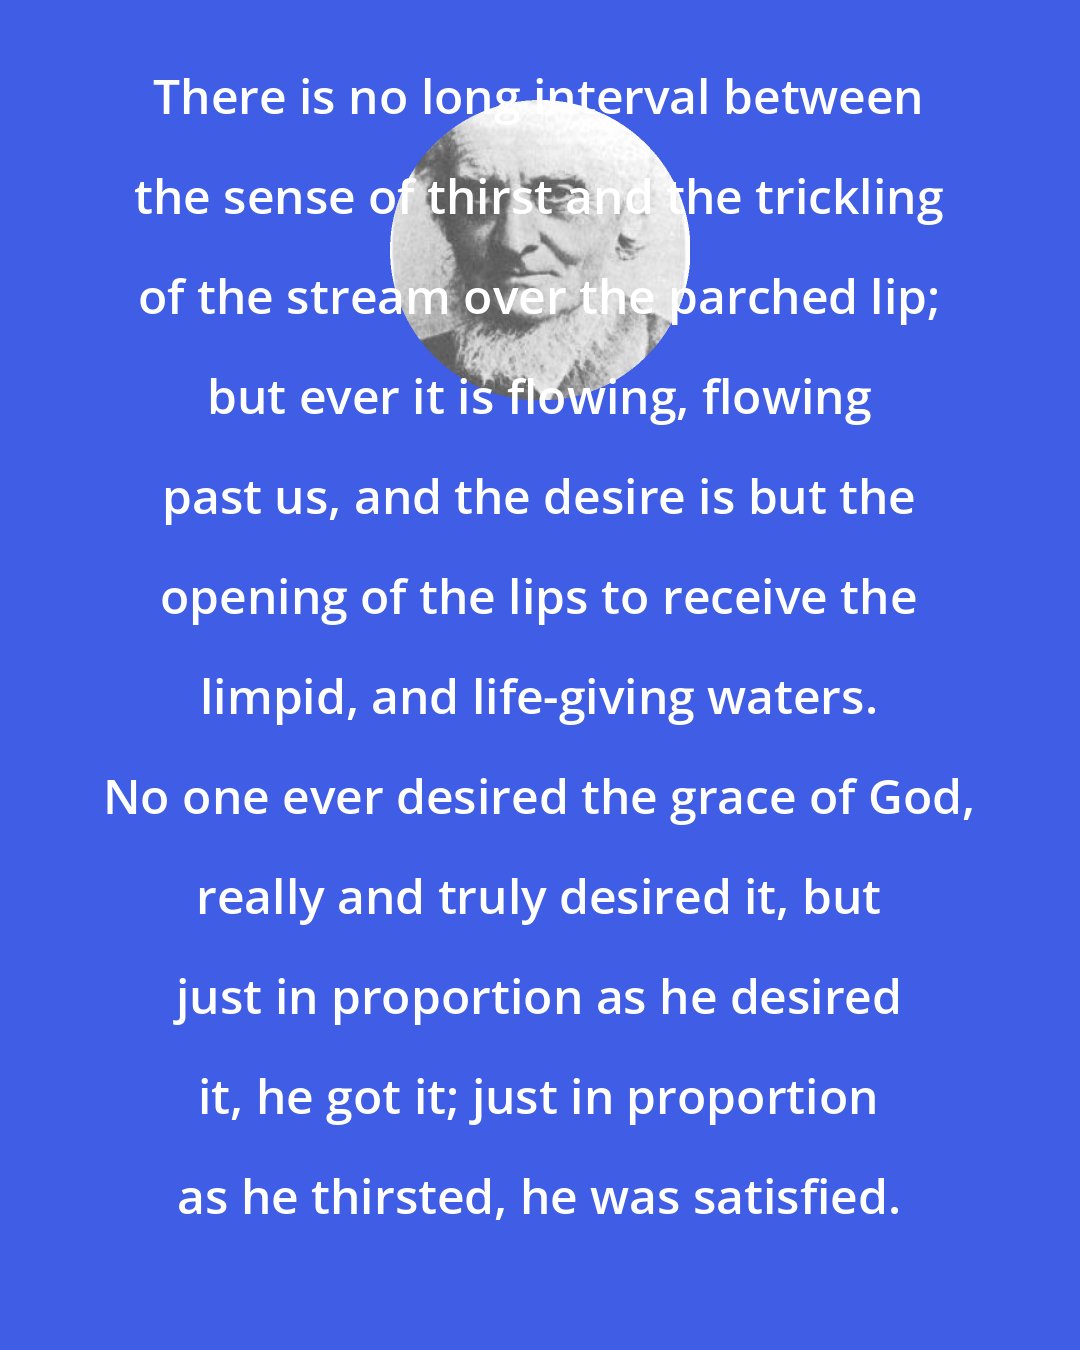 Alexander MacLaren: There is no long interval between the sense of thirst and the trickling of the stream over the parched lip; but ever it is flowing, flowing past us, and the desire is but the opening of the lips to receive the limpid, and life-giving waters. No one ever desired the grace of God, really and truly desired it, but just in proportion as he desired it, he got it; just in proportion as he thirsted, he was satisfied.